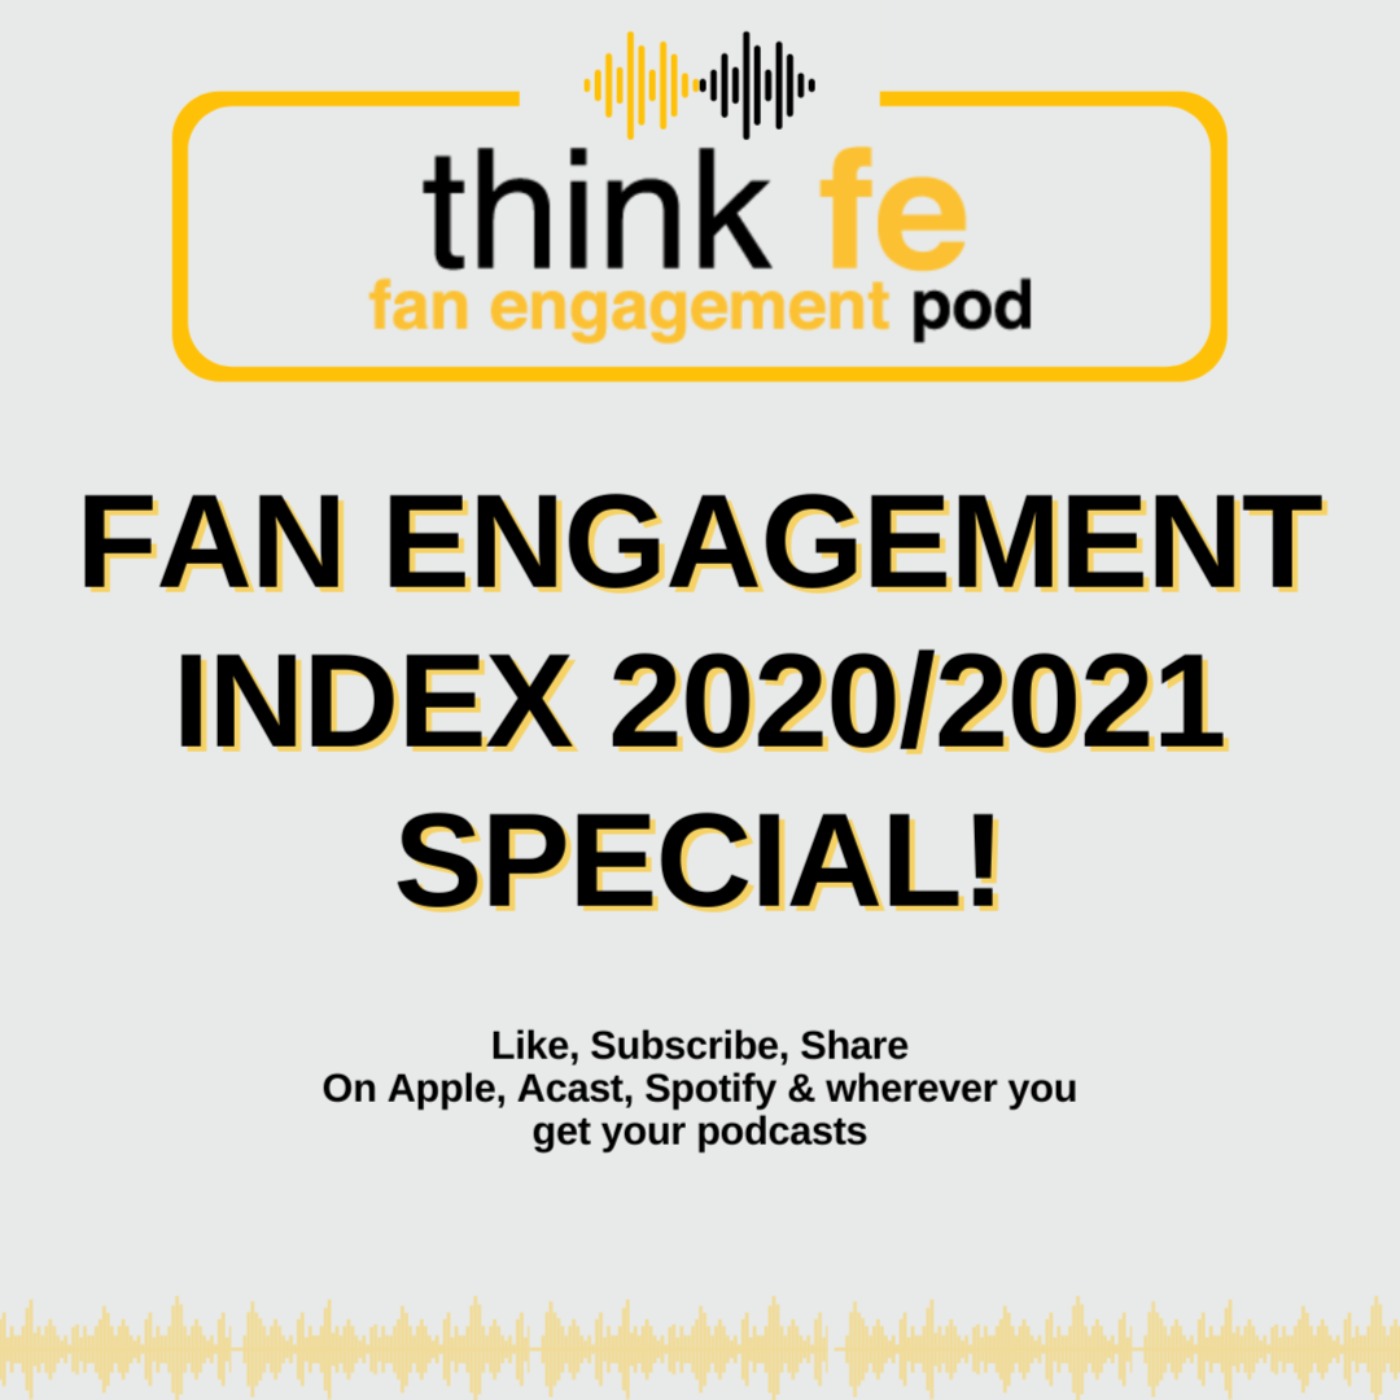 Fan Engagement Index 2020/2021 Special!